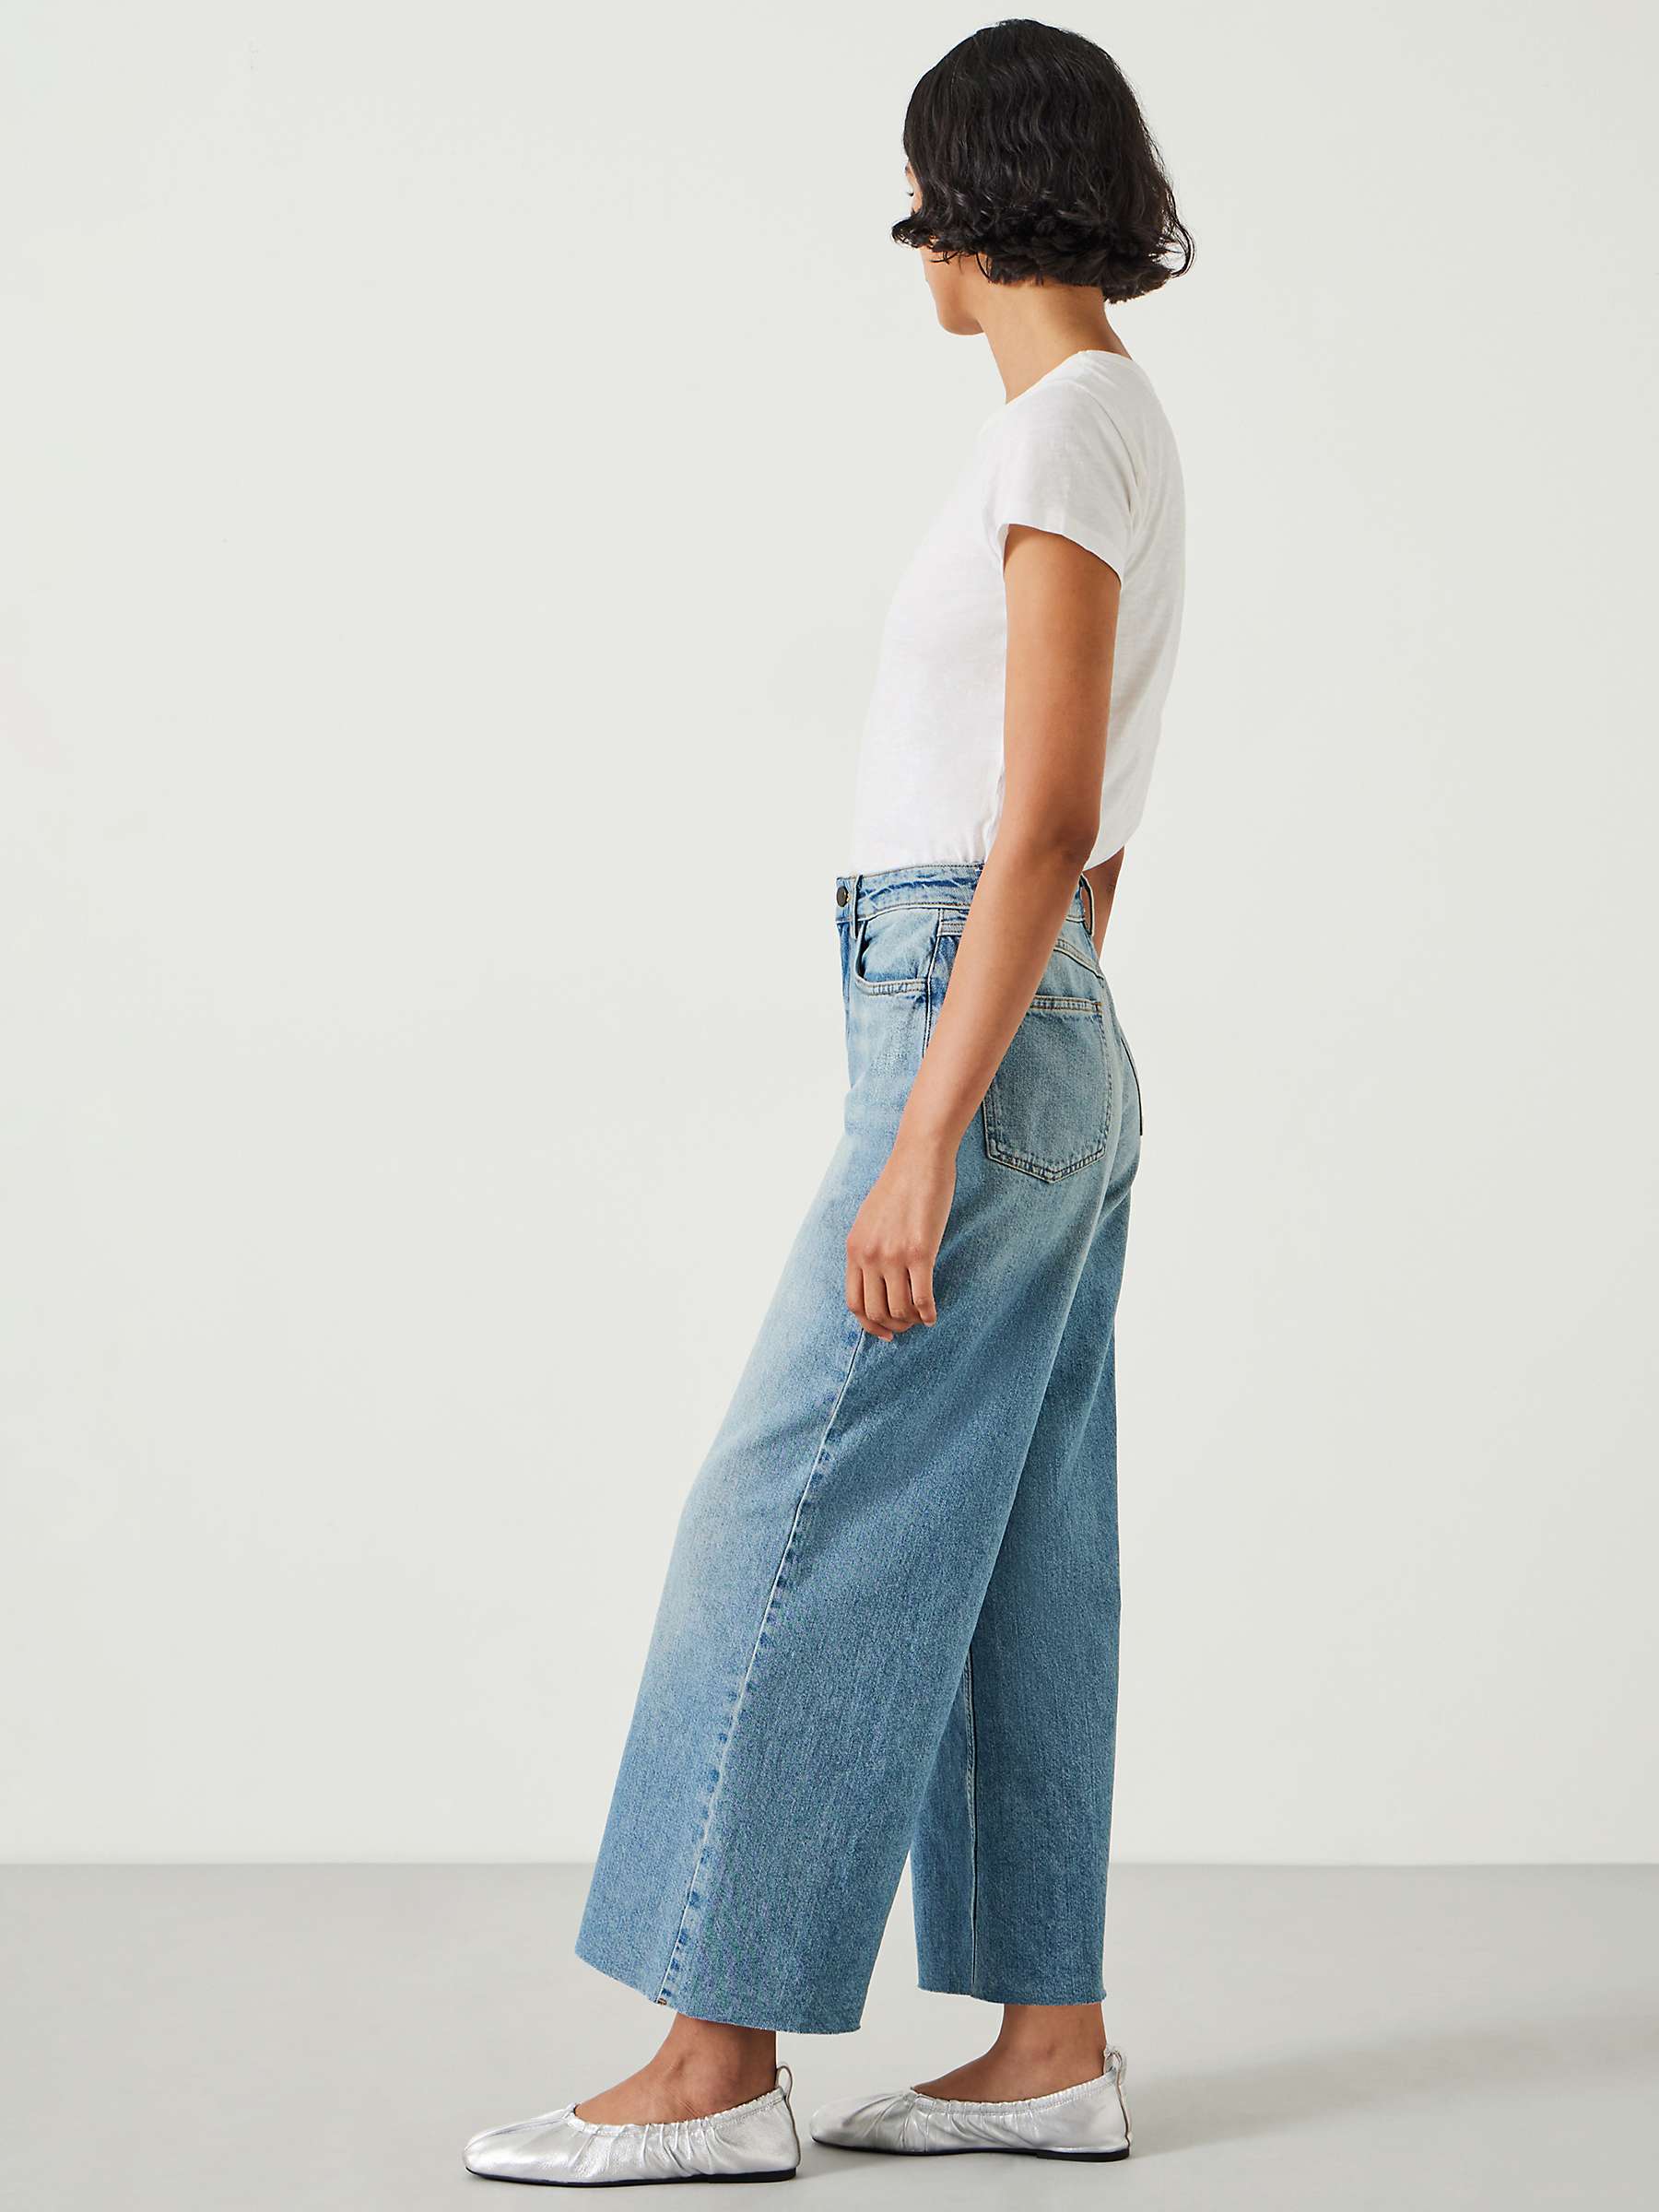 Buy HUSH Abi Cropped Wide Leg Jeans, Mid Authentic Online at johnlewis.com